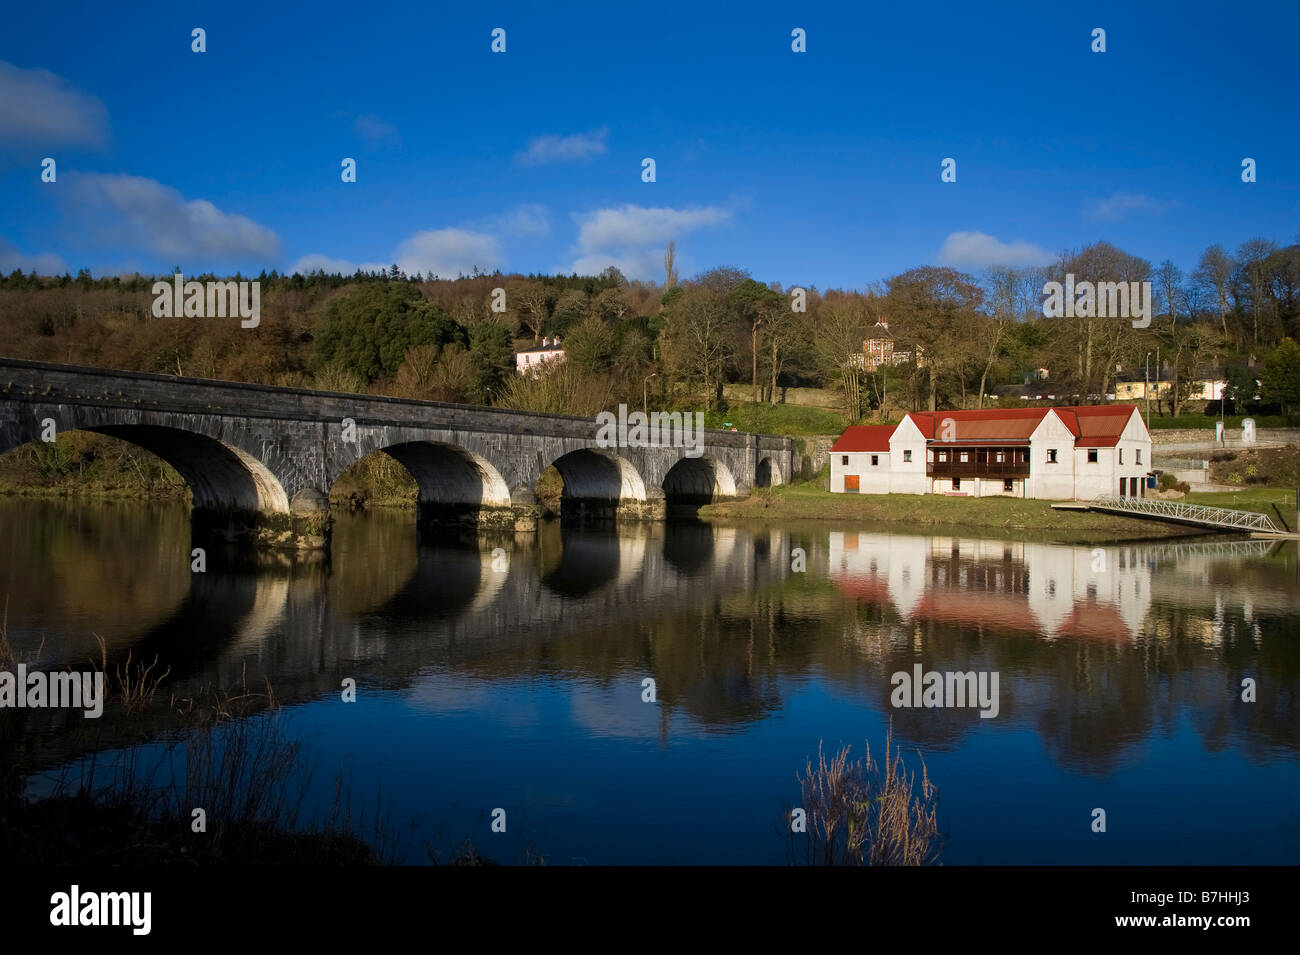 19th Century Avonmore Bridge over the Blackwater River, And Cappoquin Rowing Club Boathouse, Cappoquin, County Waterford, Ireland Stock Photo